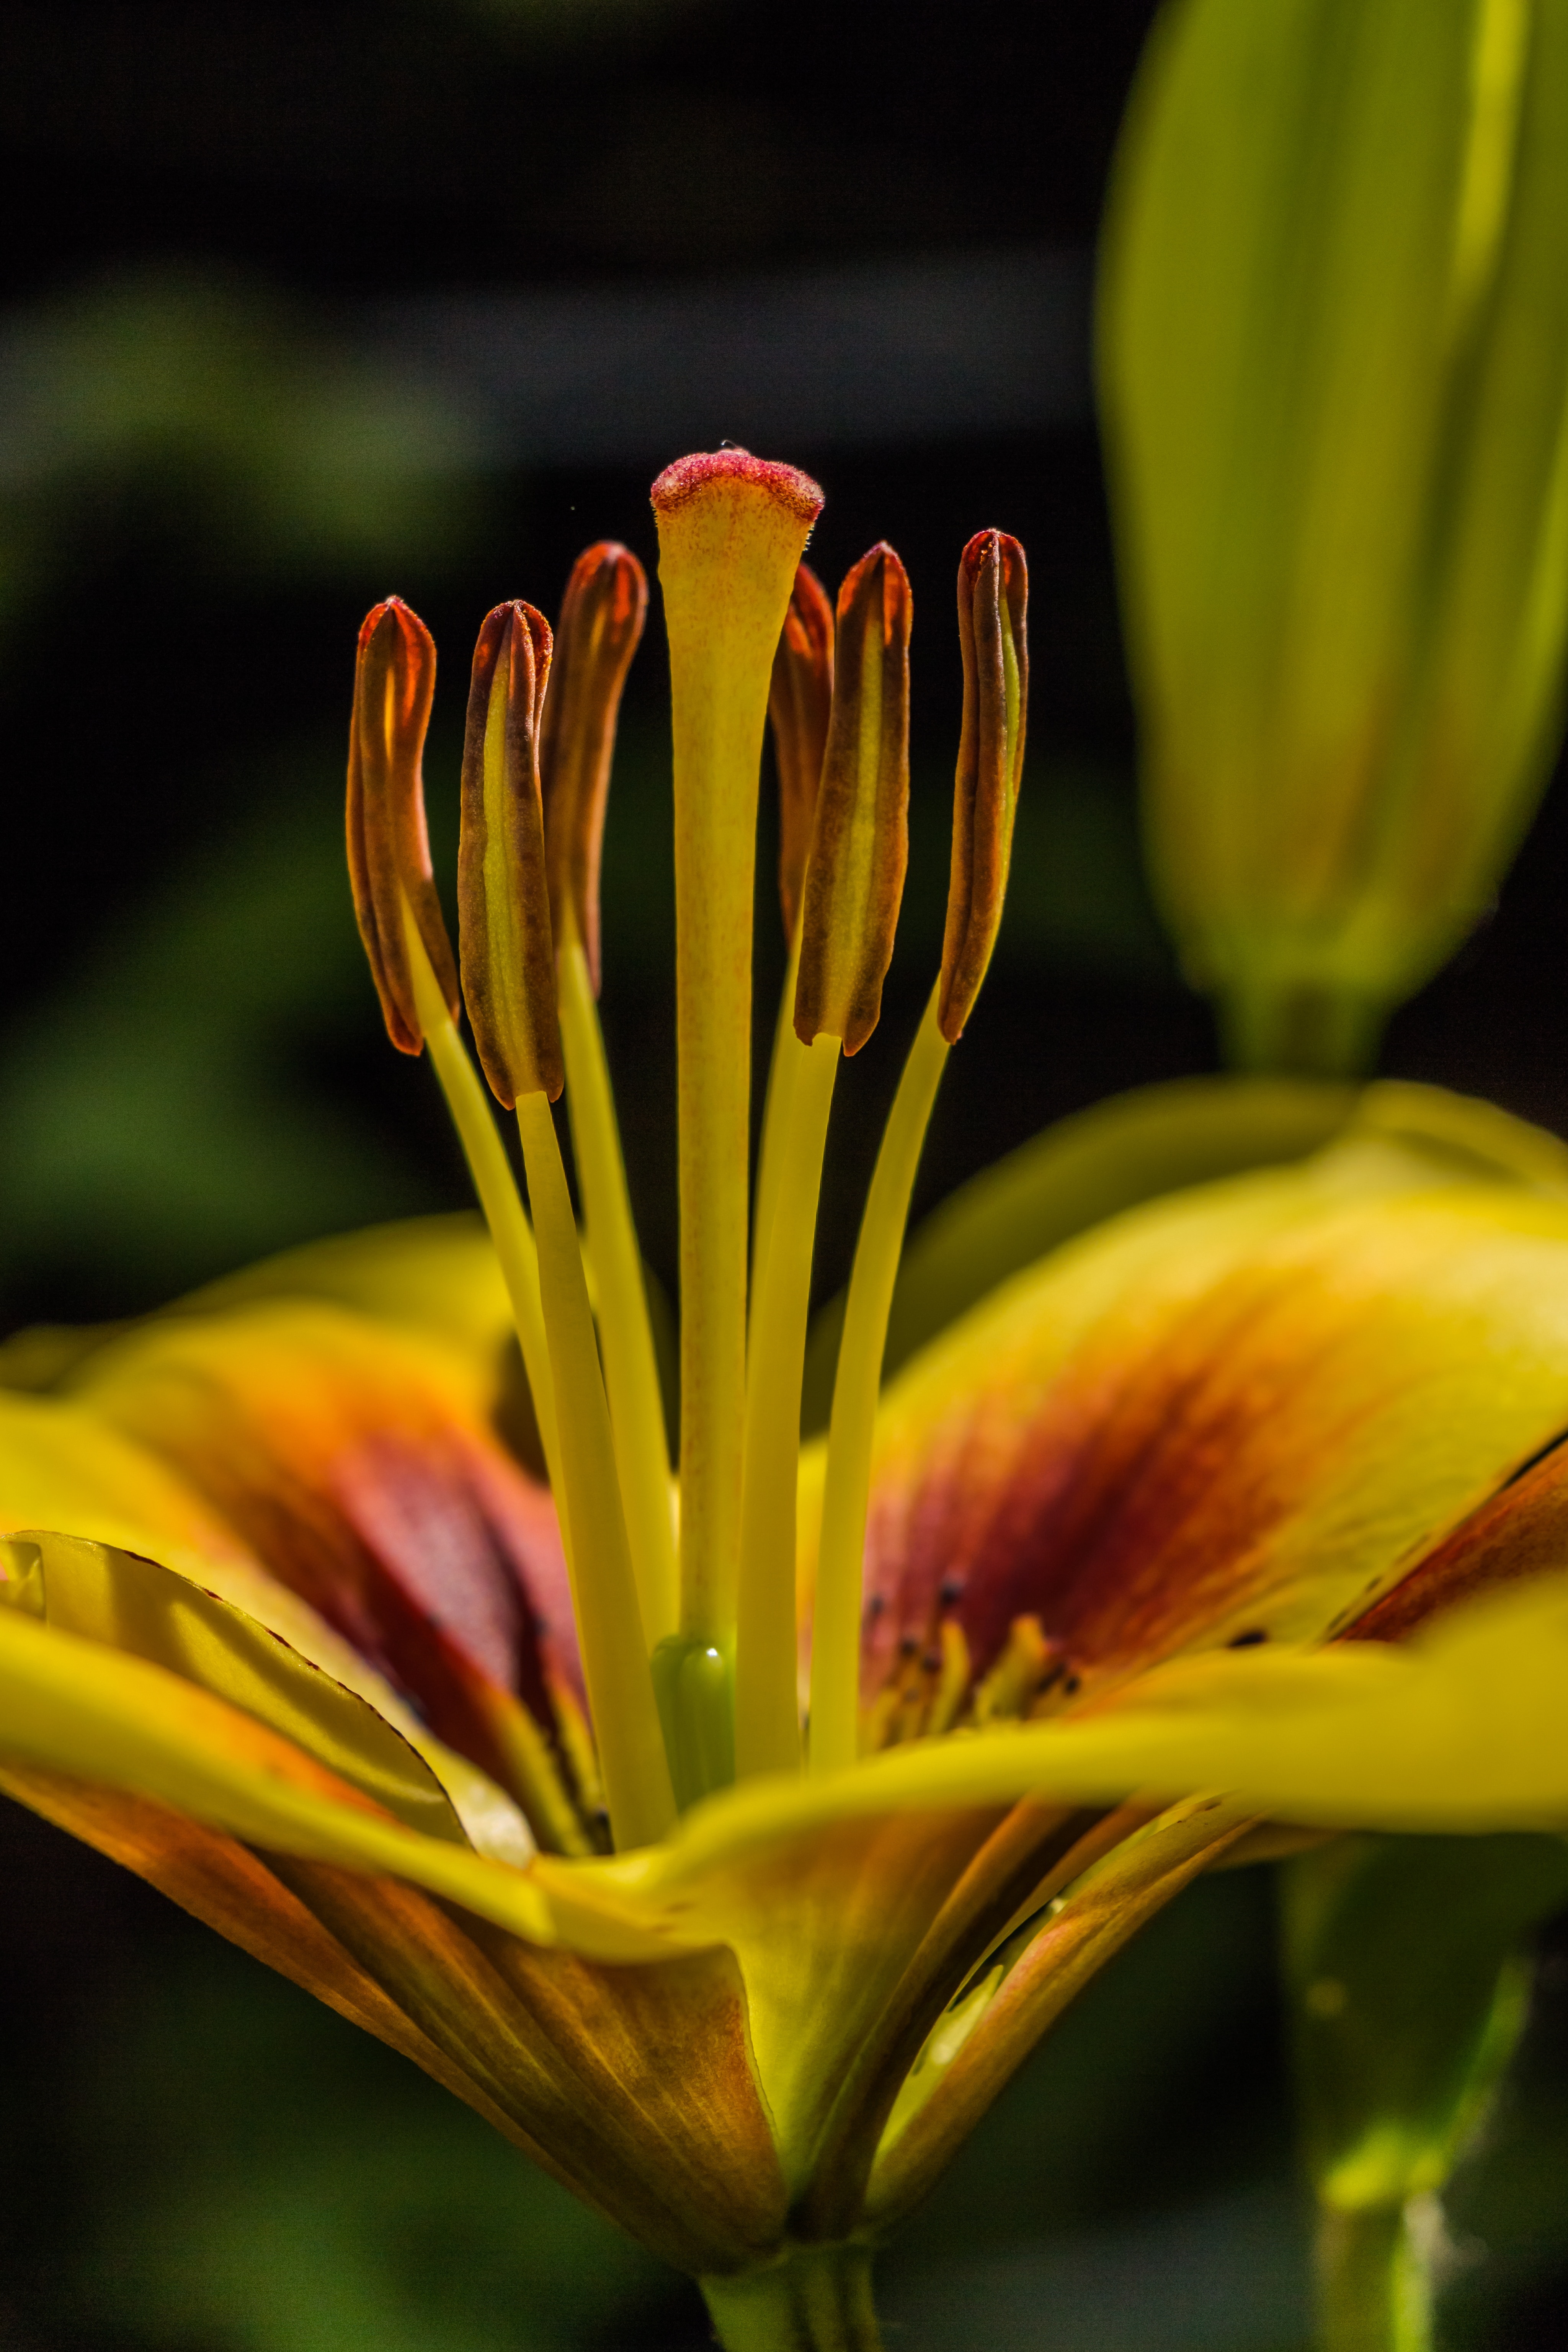 yellow and red petaled flower